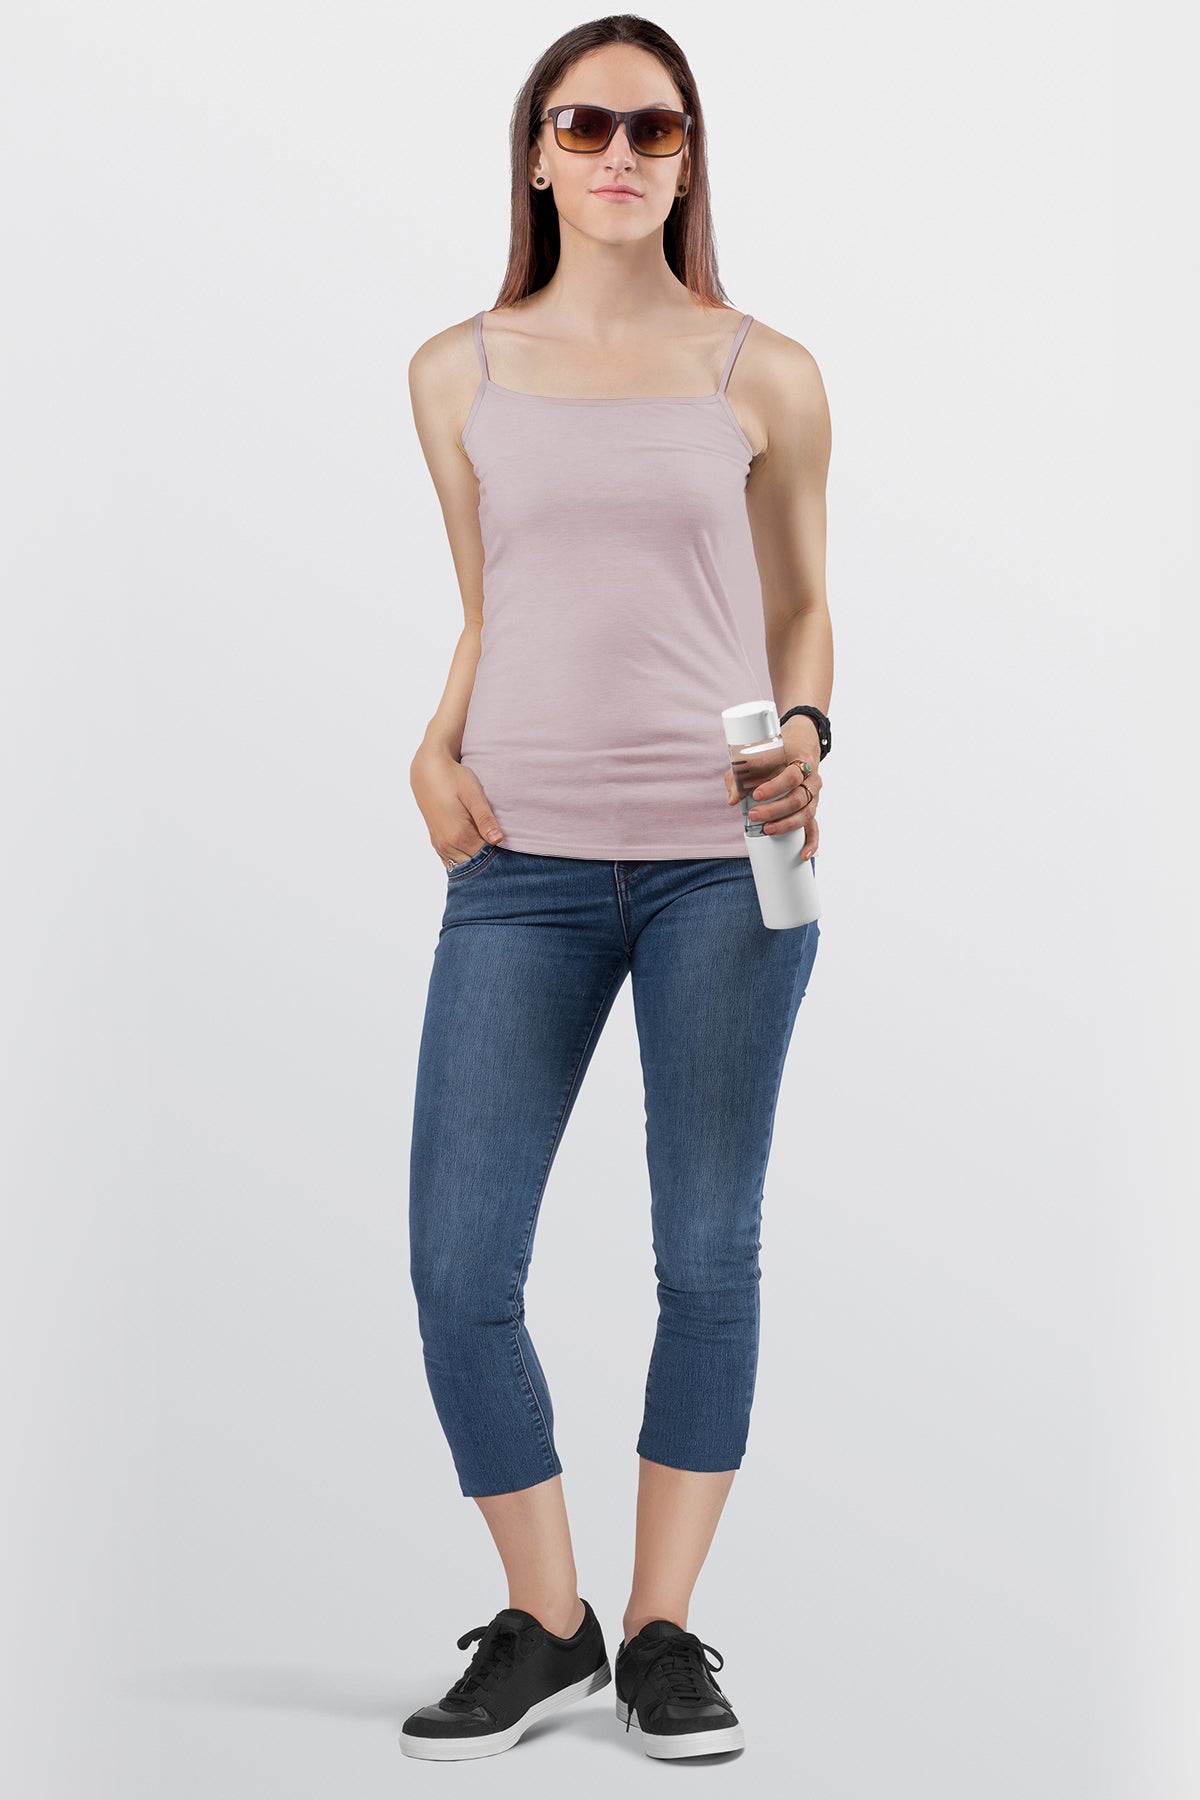 BLS - Colleen Stretchable Cotton Camisole - Pink